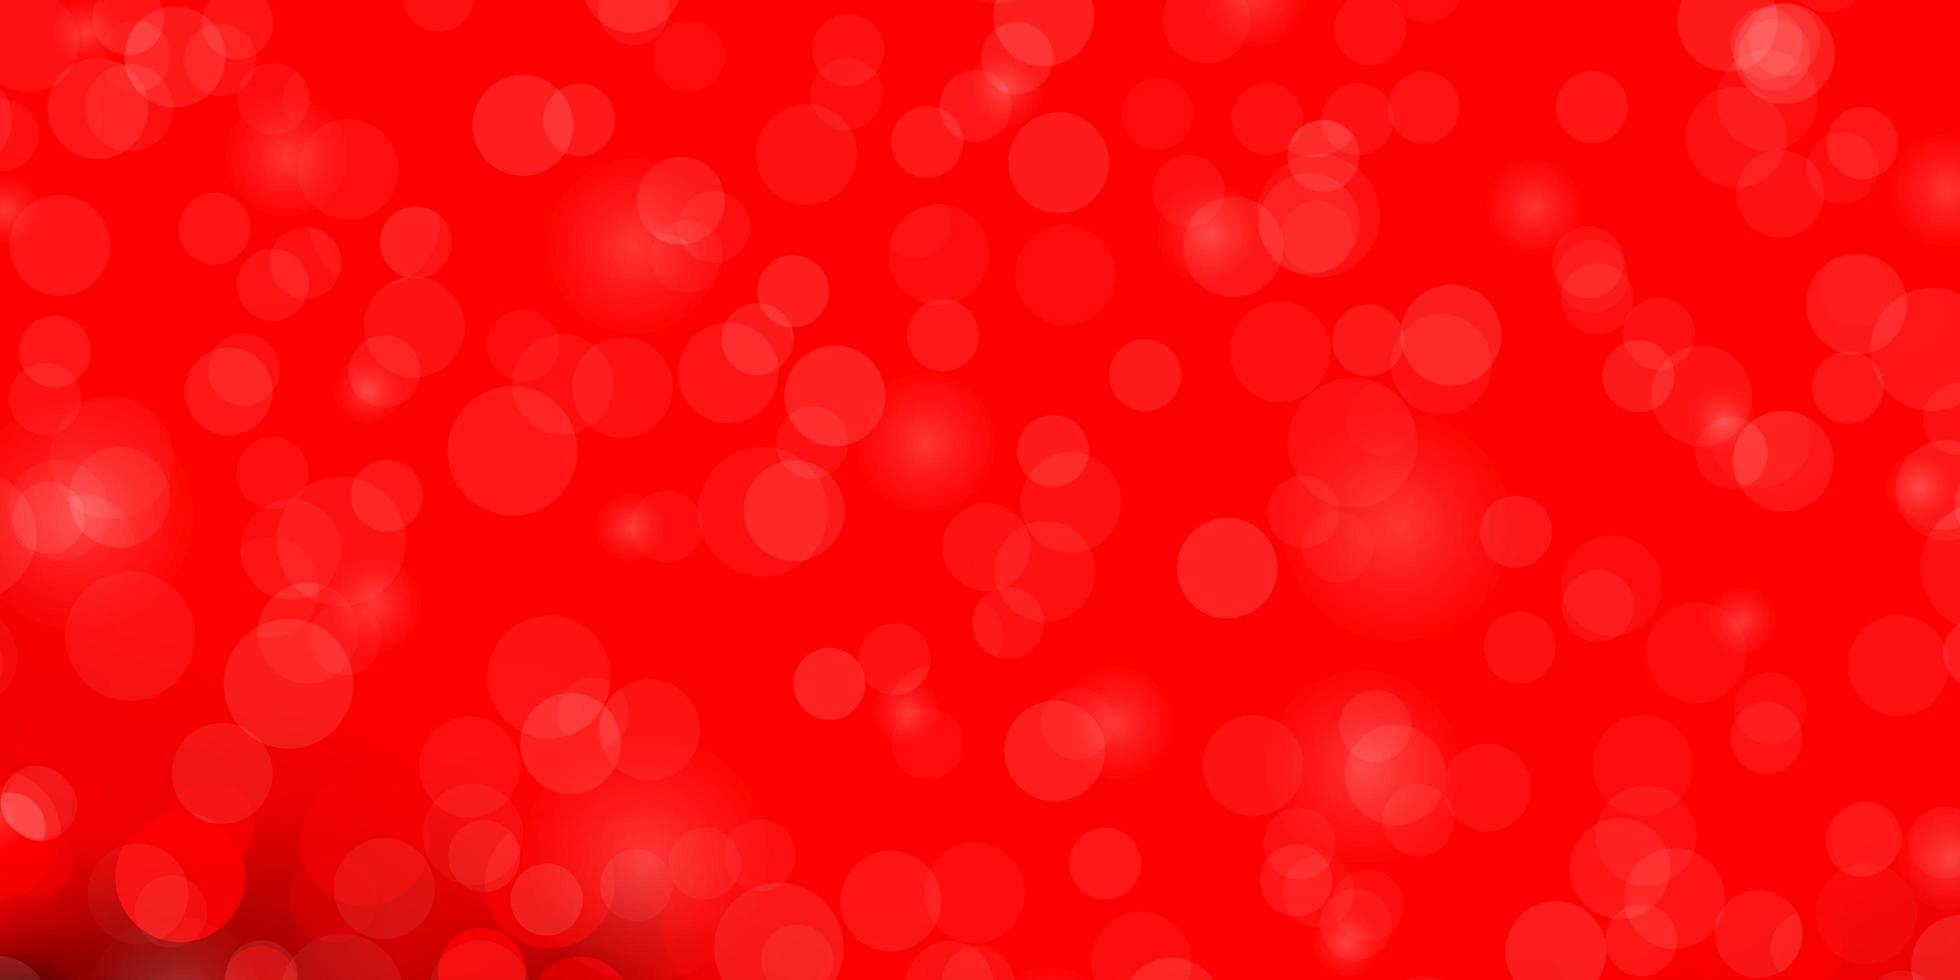 Light Red vector background with circles.